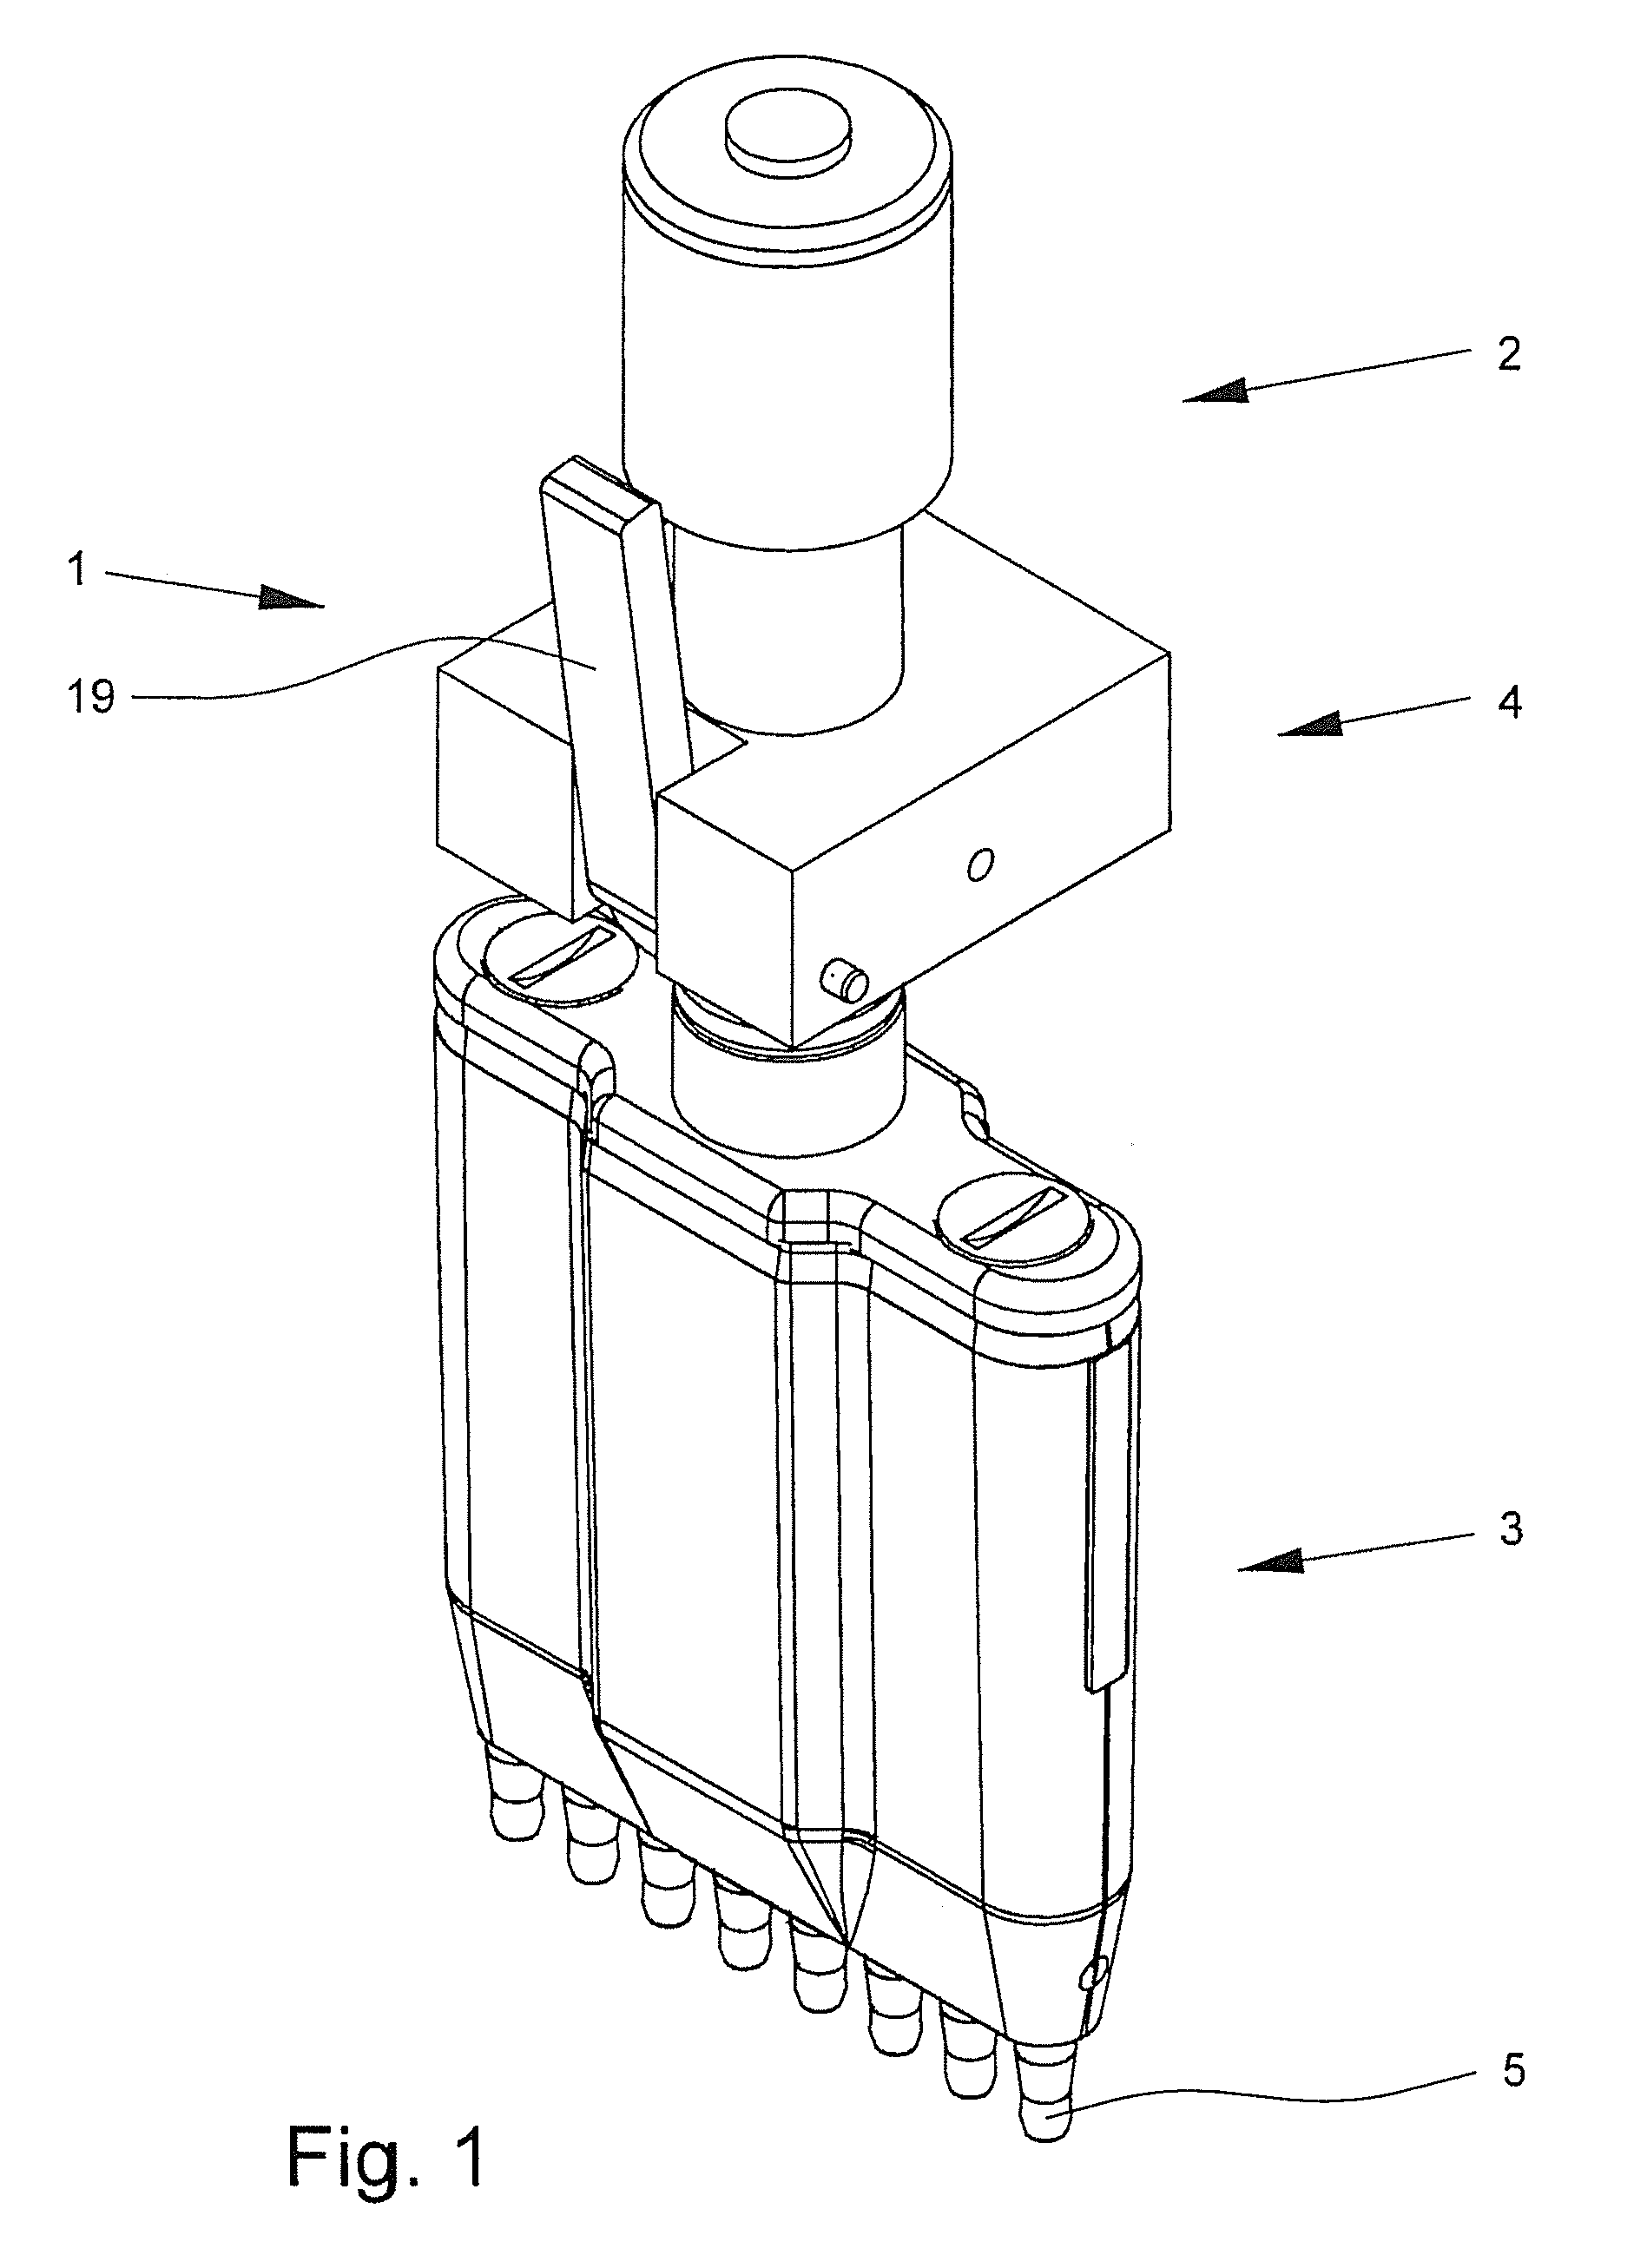 Piston-operated pipette with interchangeable displacement unit